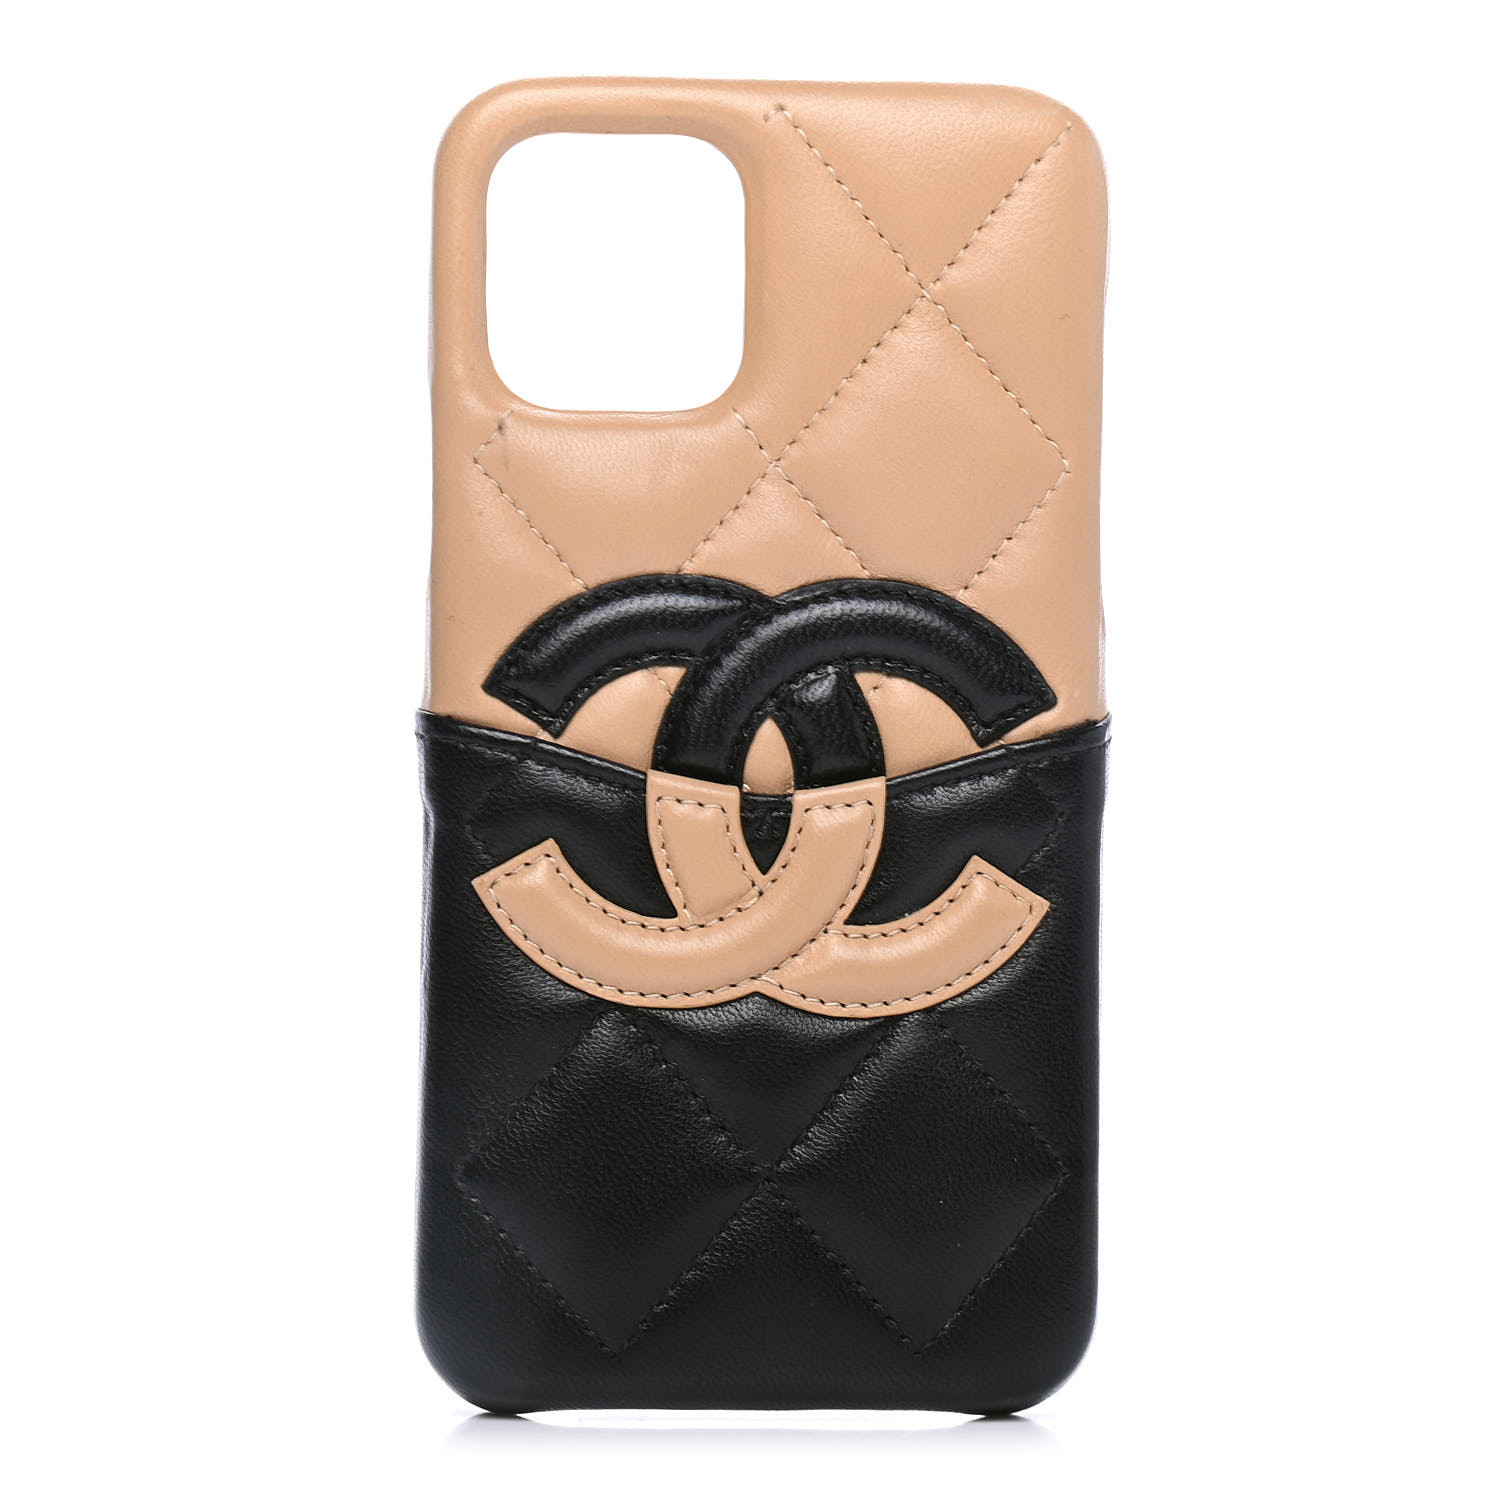 Chanel Lambskin Quilted Cc Iphone Xi Pro Case Beige Black 1199 Fashionphile